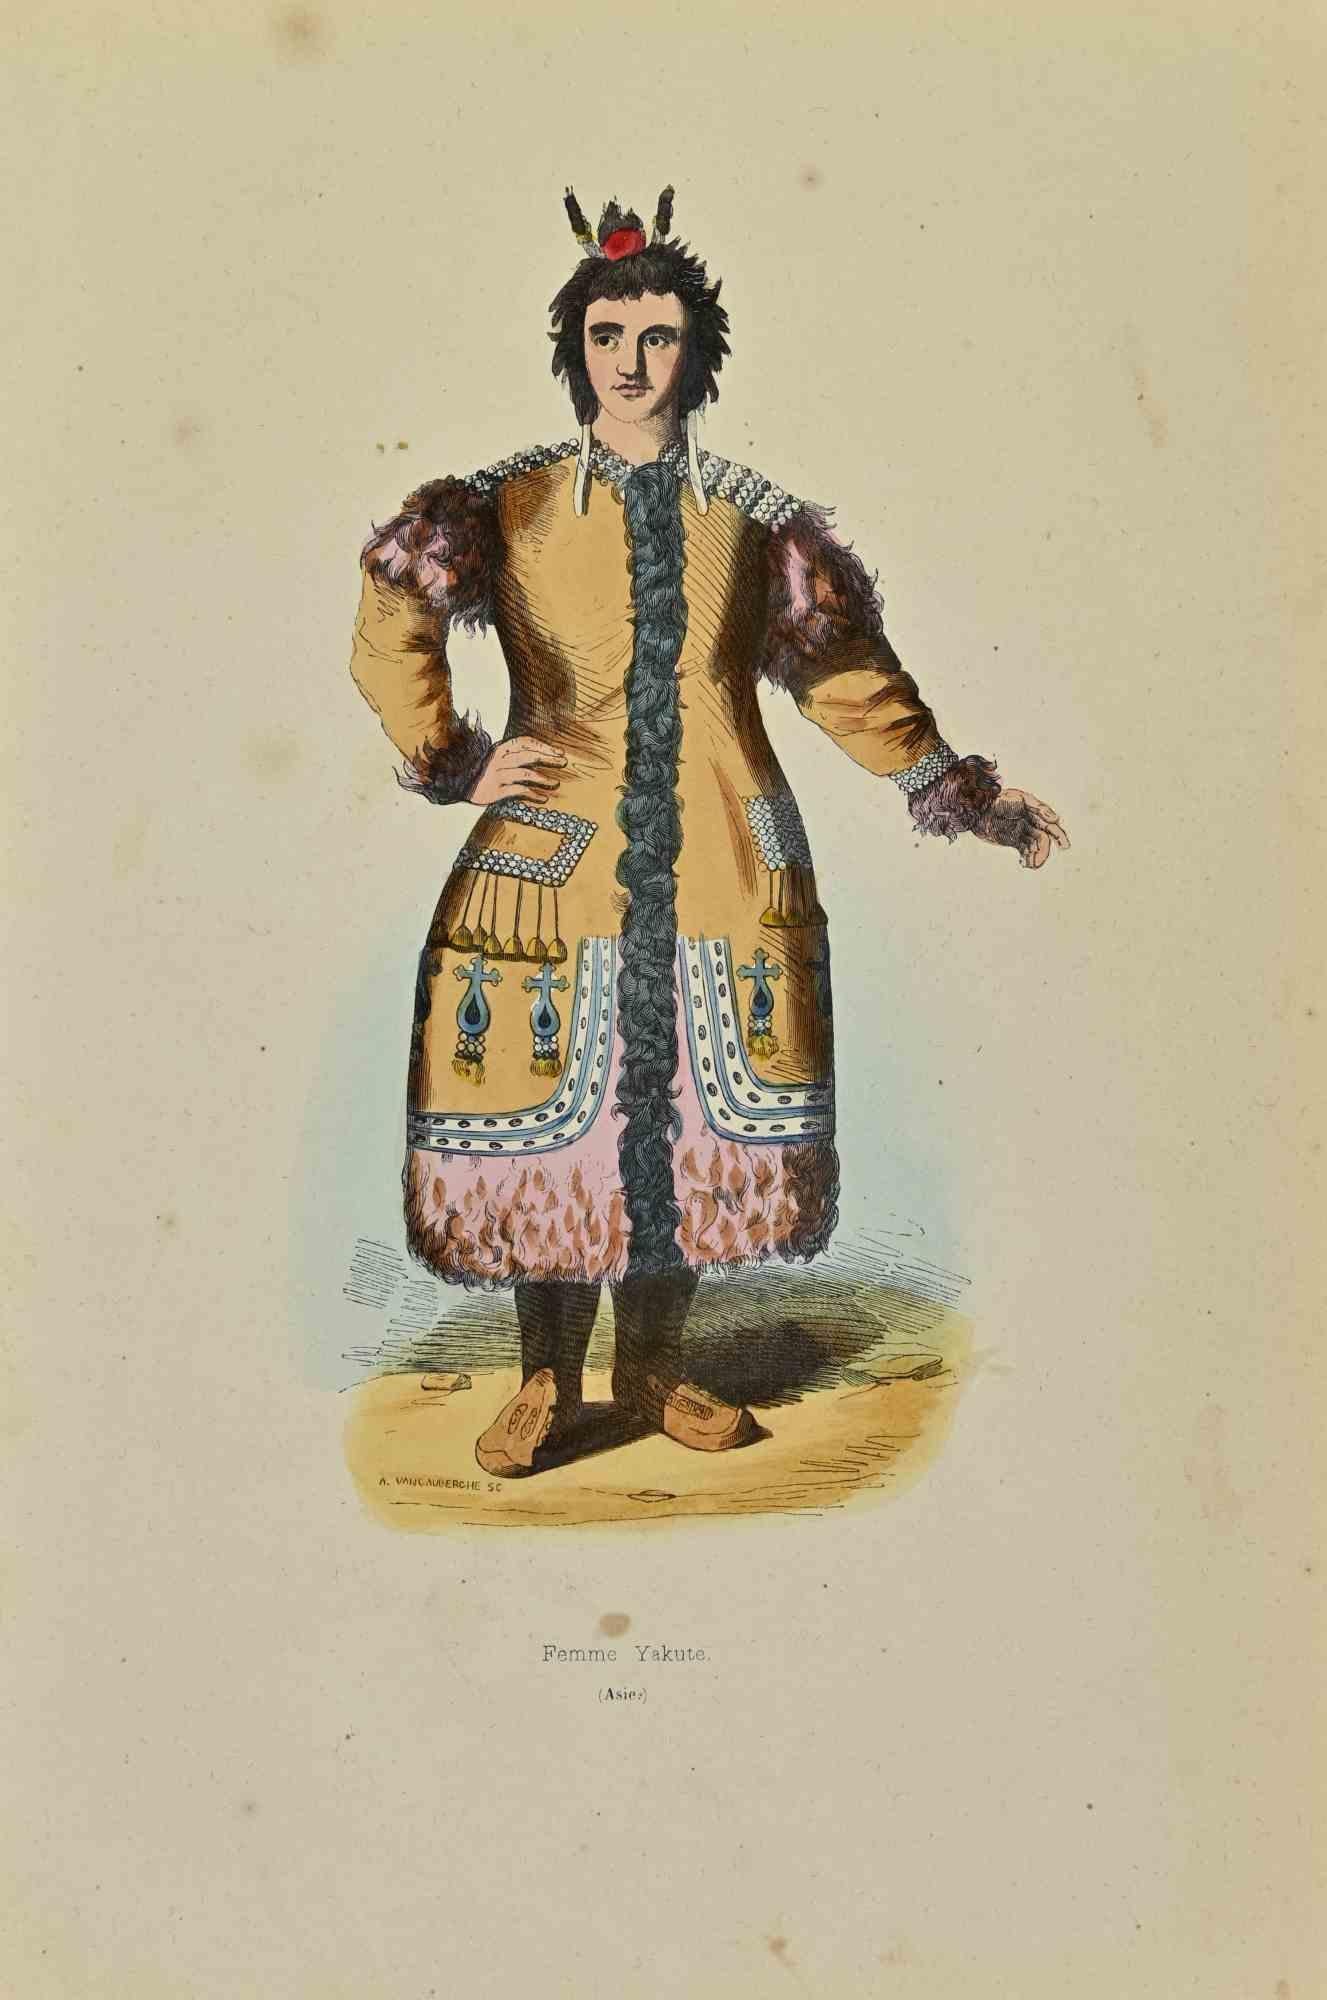 Yakut Woman is a lithograph made by Auguste Wahlen in 1844.

Hand colored.

Good condition.

At the center of the artwork is the original title "Femme Yakute".

The work is part of Suite Moeurs, usages et costumes de tous les peuples du monde,